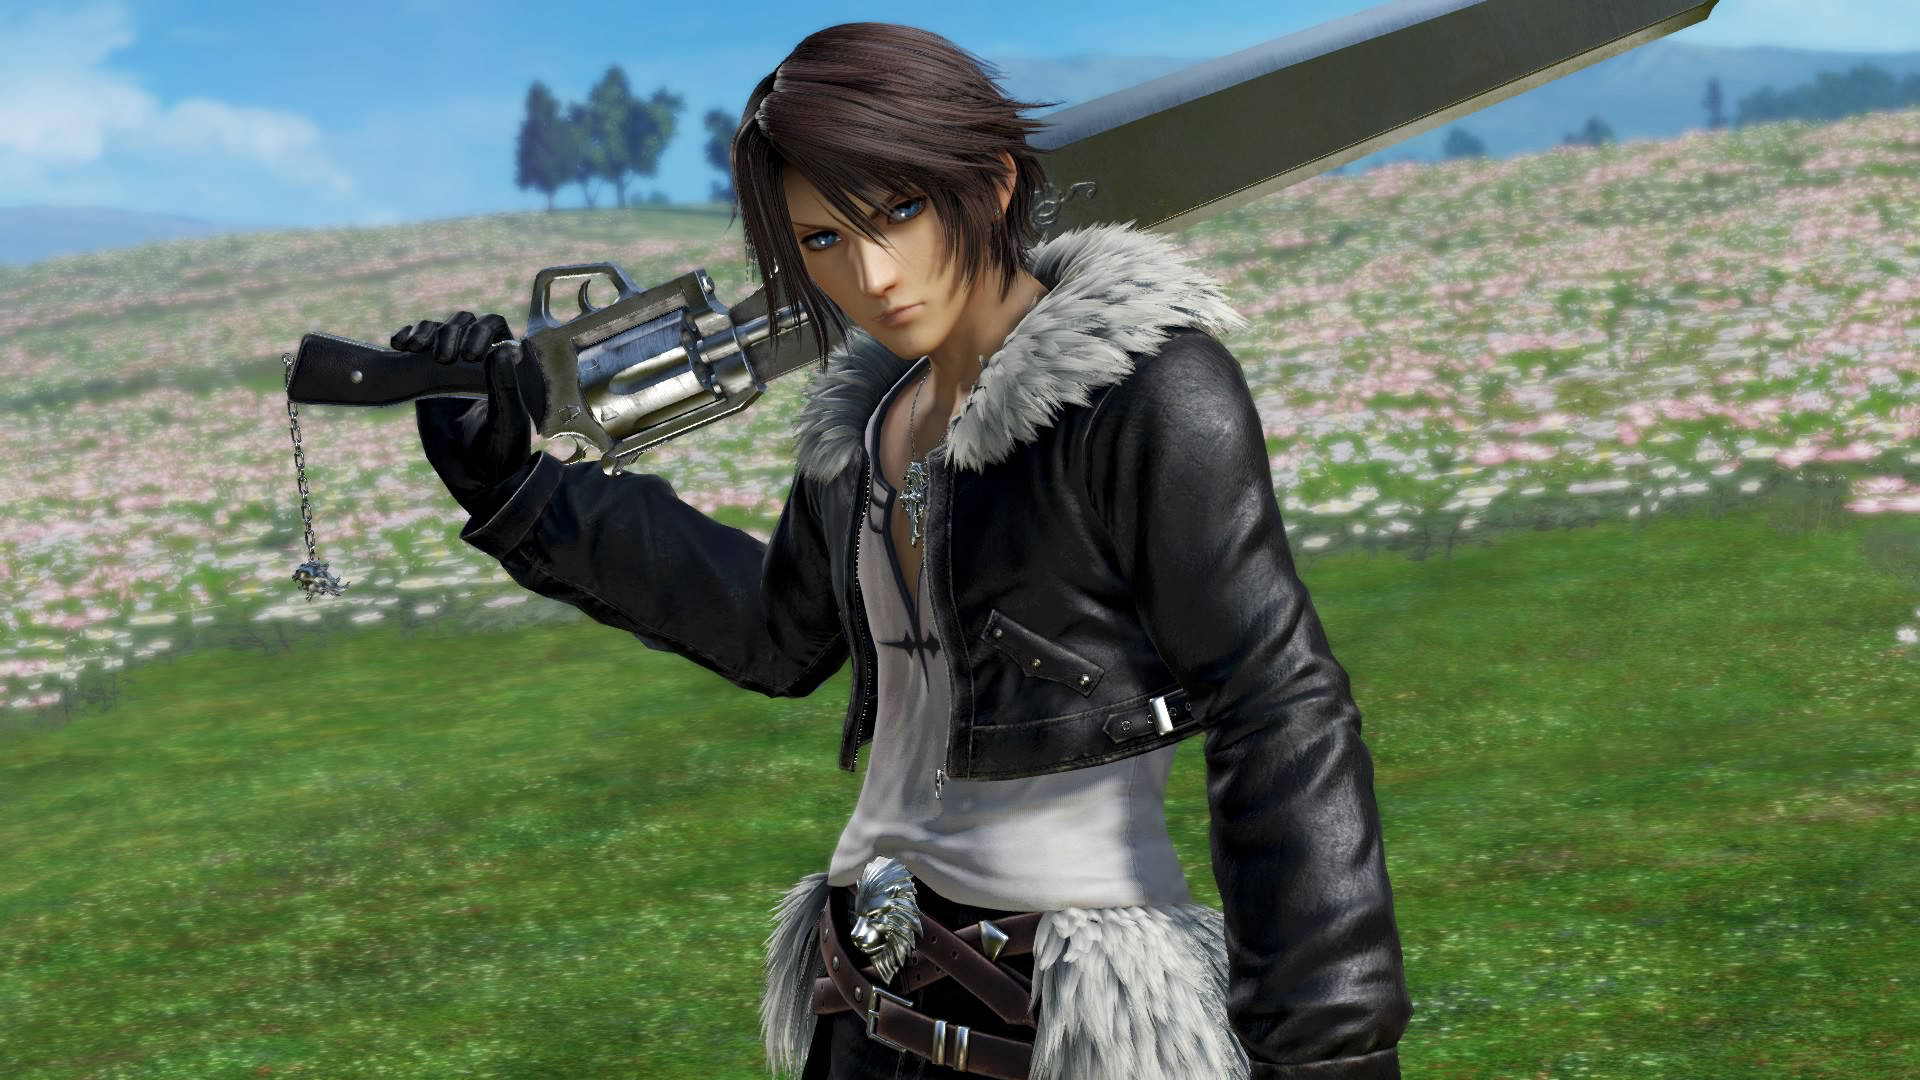 Remastered Squall Final Fantasy 8 Background